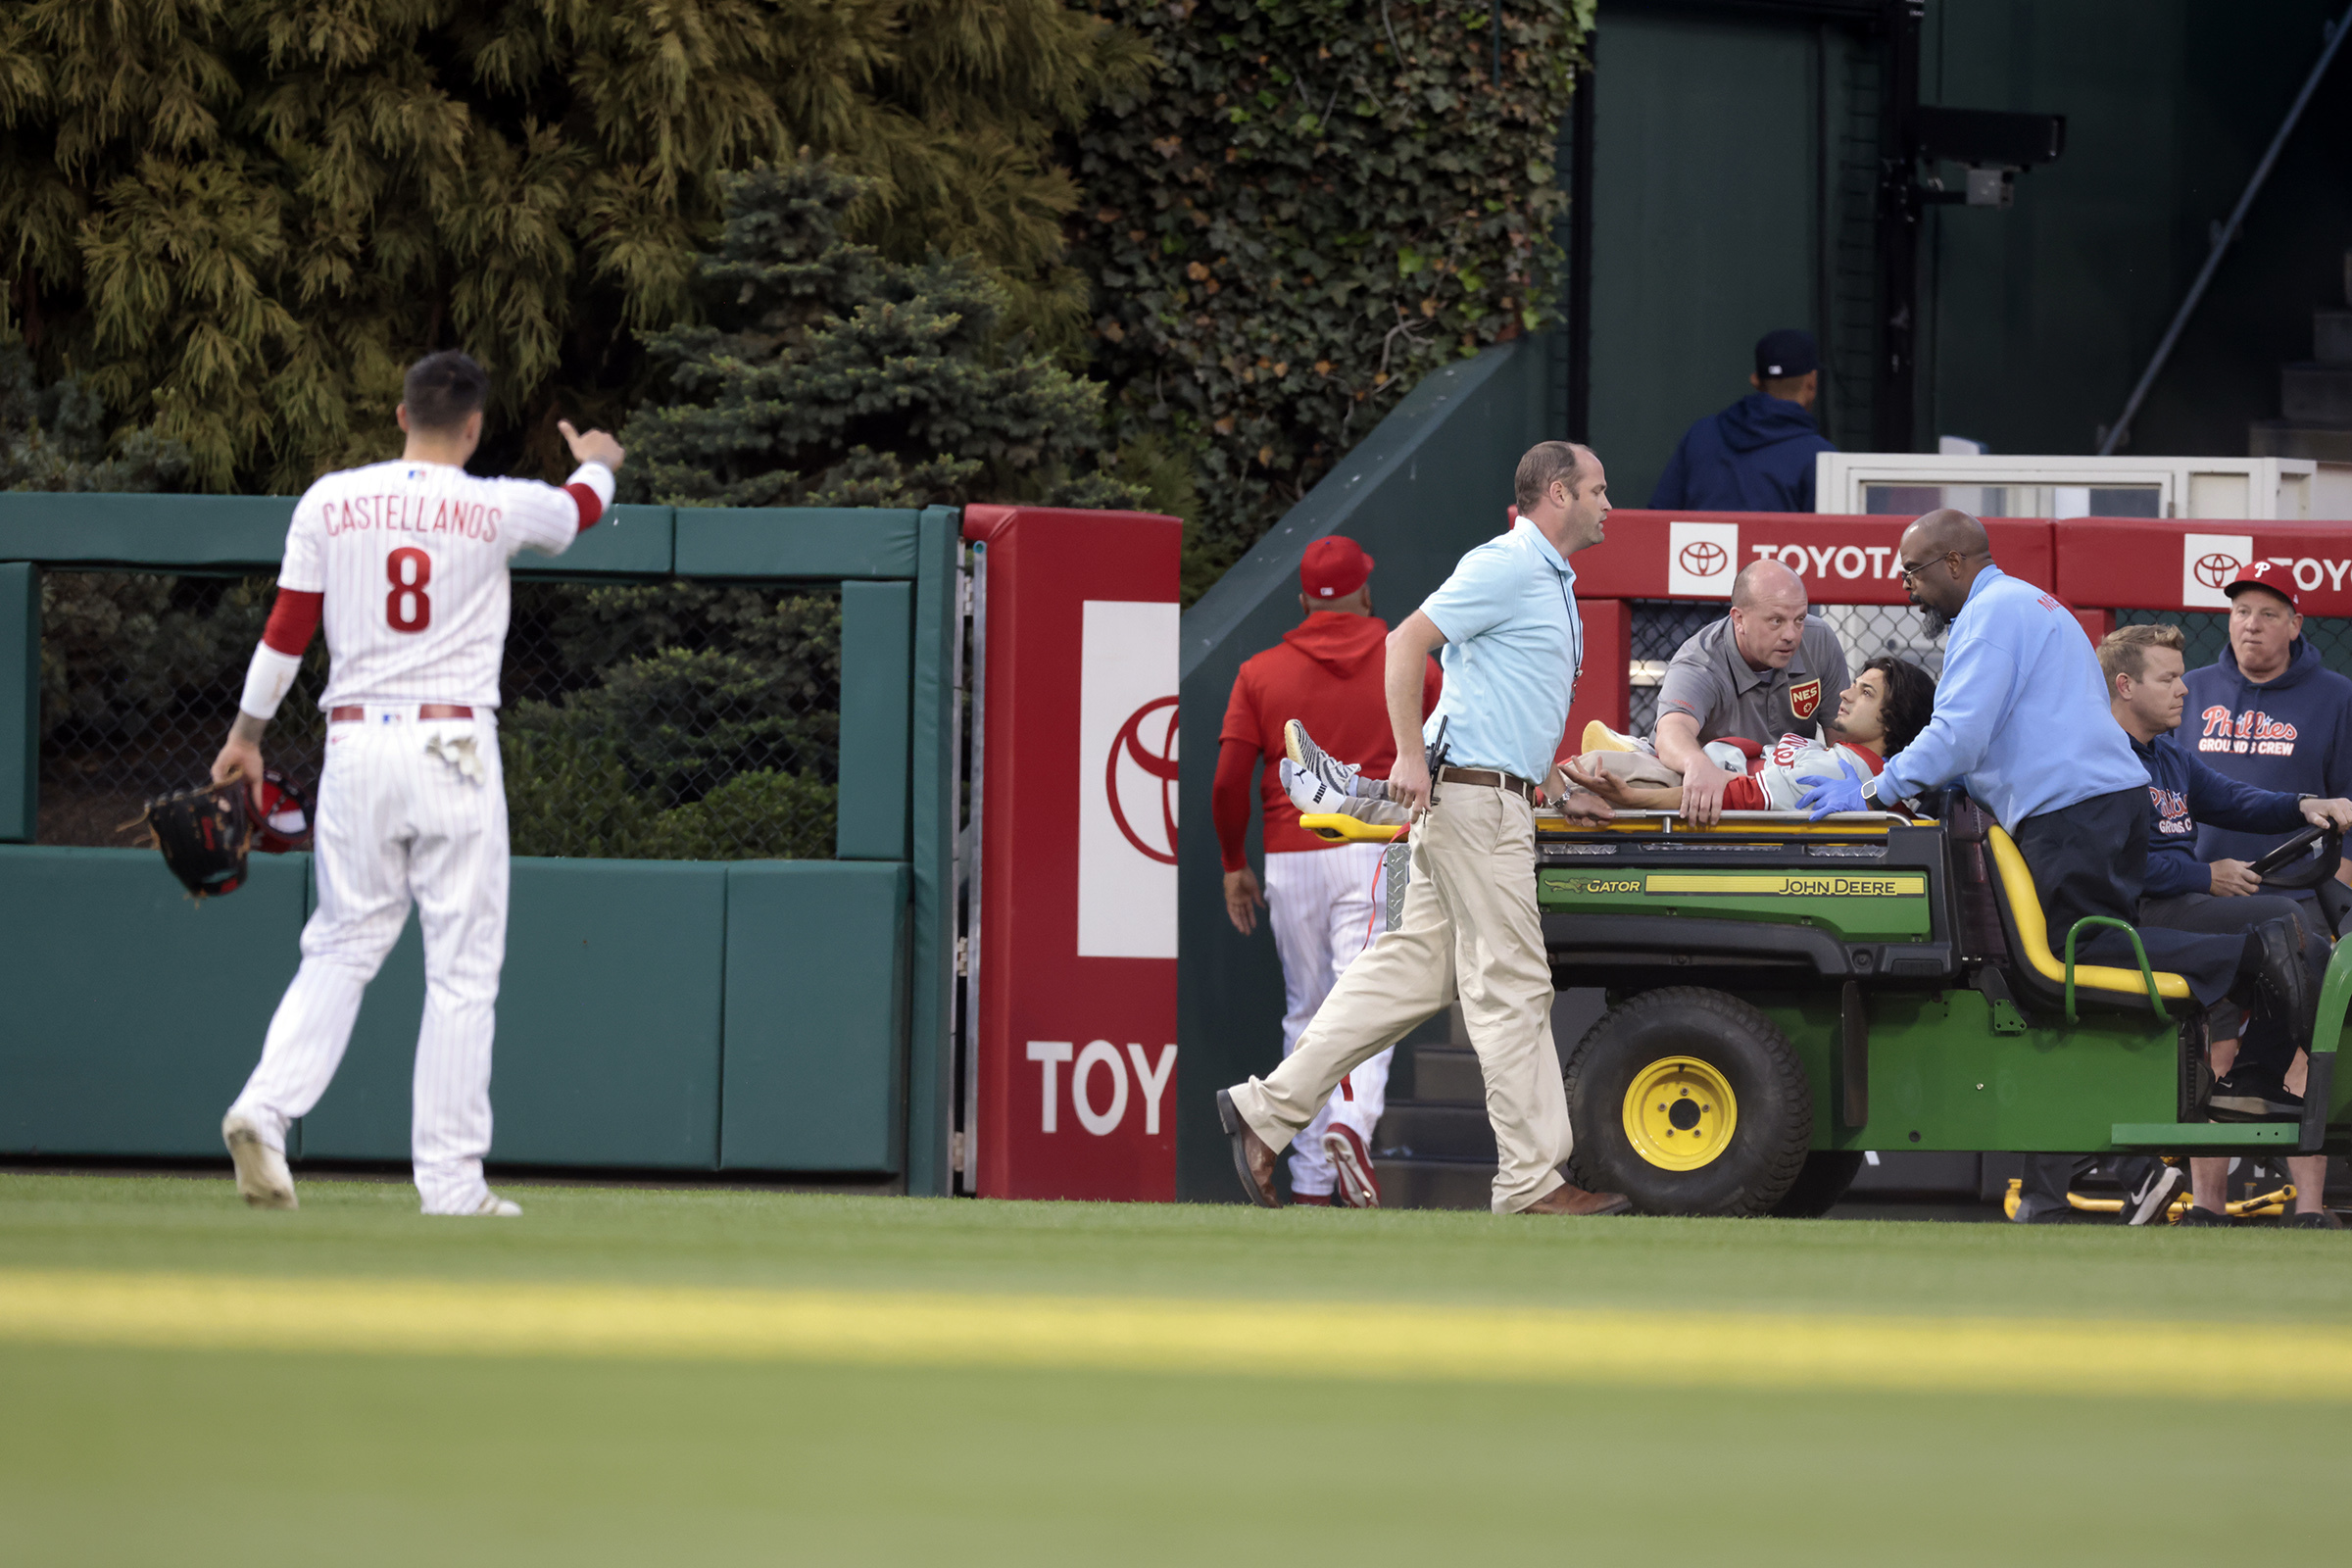 Fan Taken To Hospital Following Fall Over Railing At Phillies-Red Sox Game